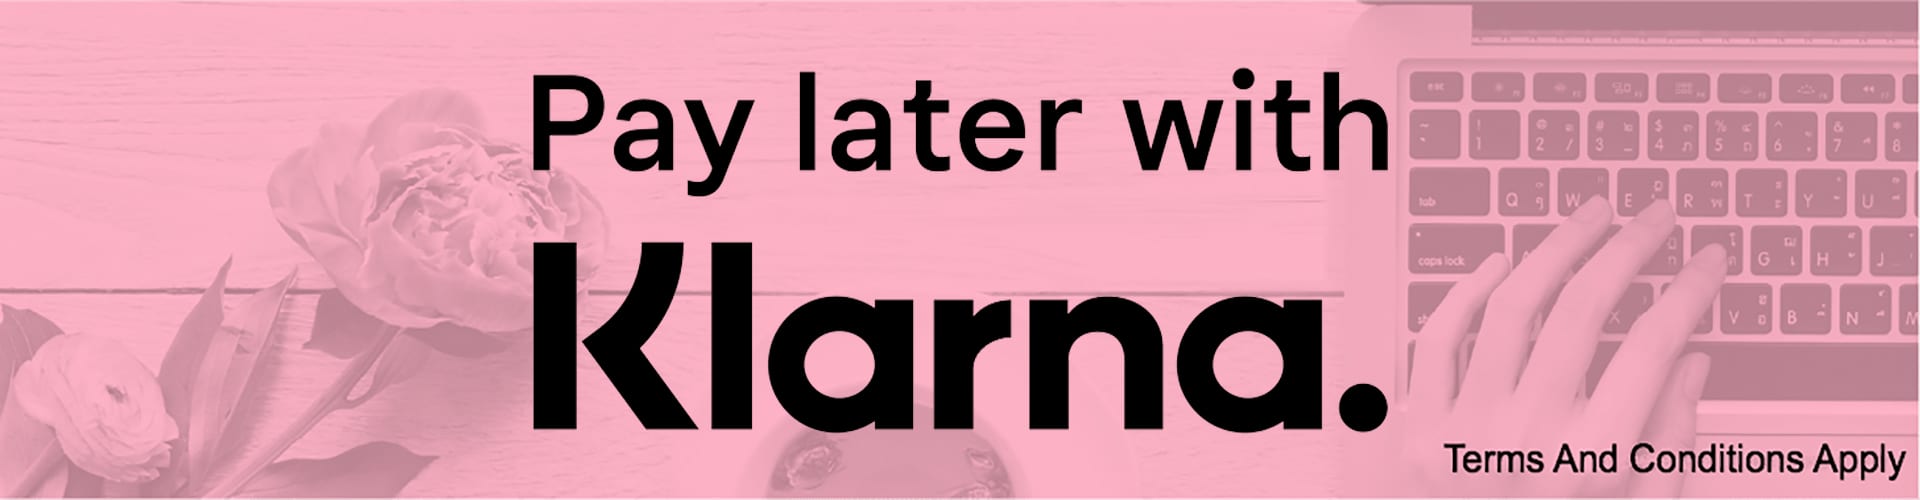 pay later with Klarna